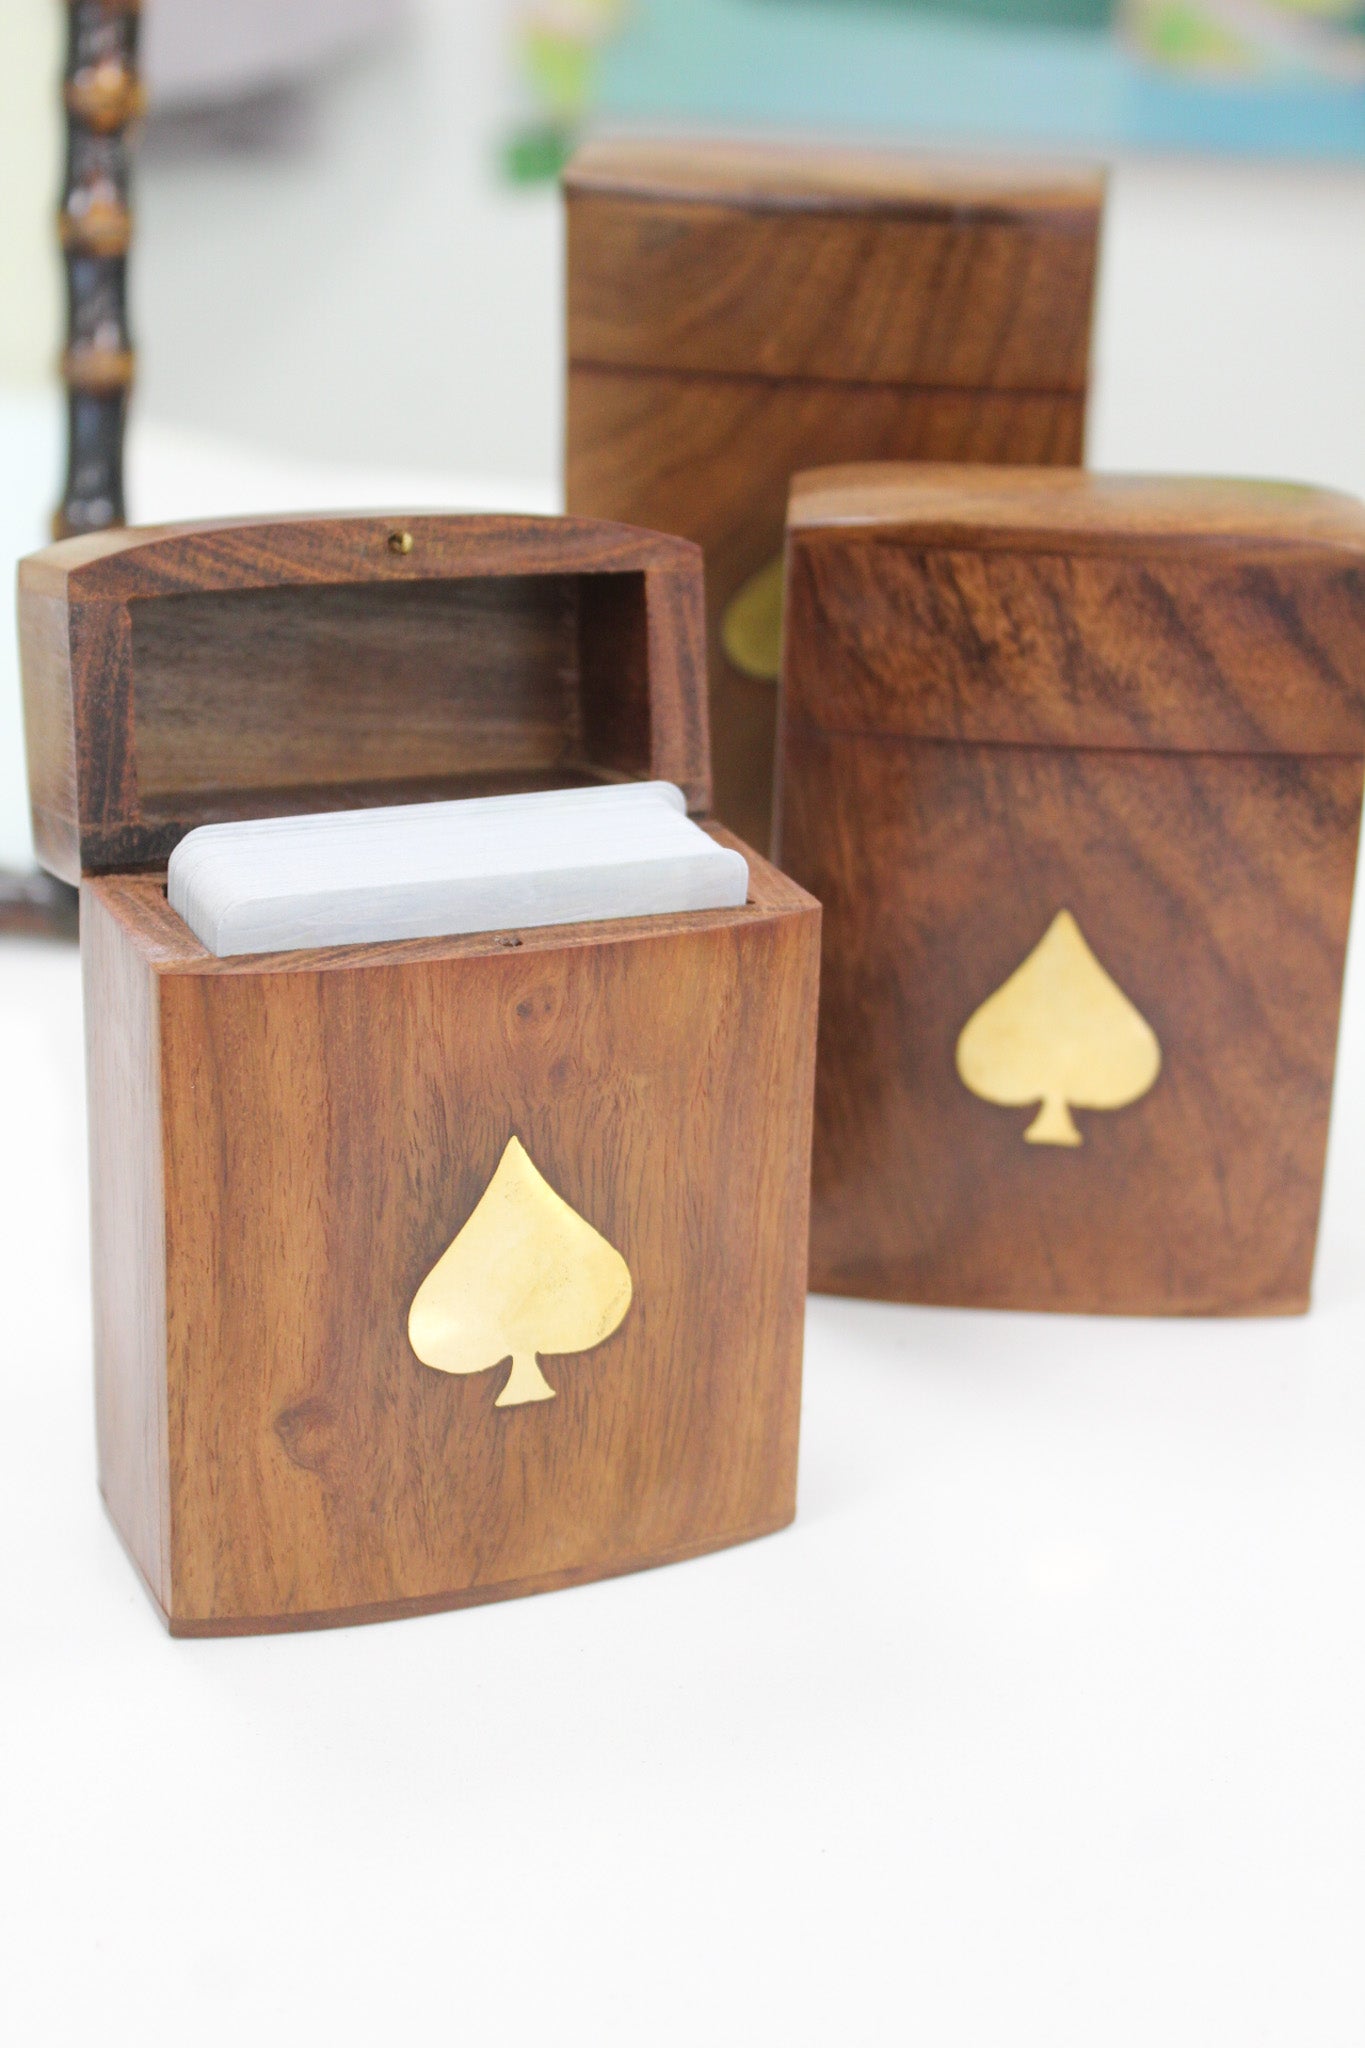 Hand-Crafted Wooden Playing Card Case